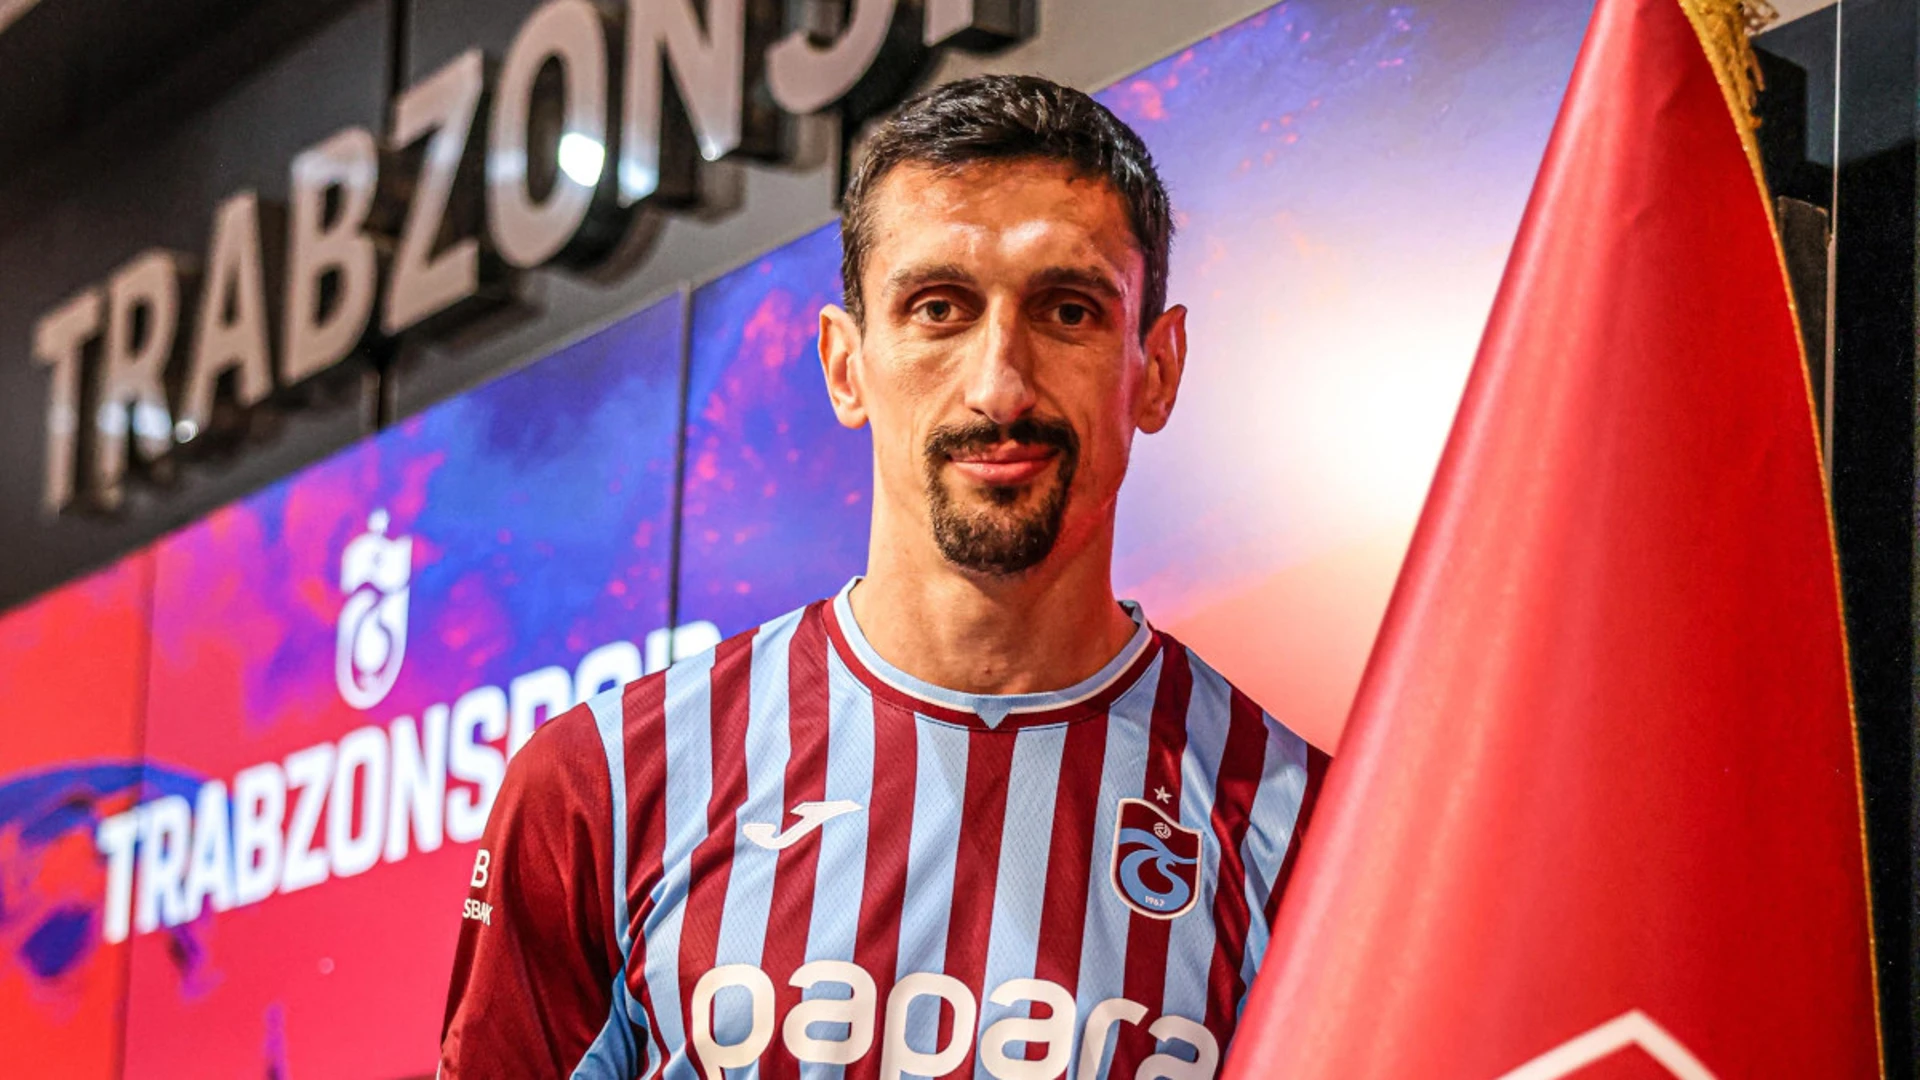 Savic leaves Atletico to join Trabzonspor